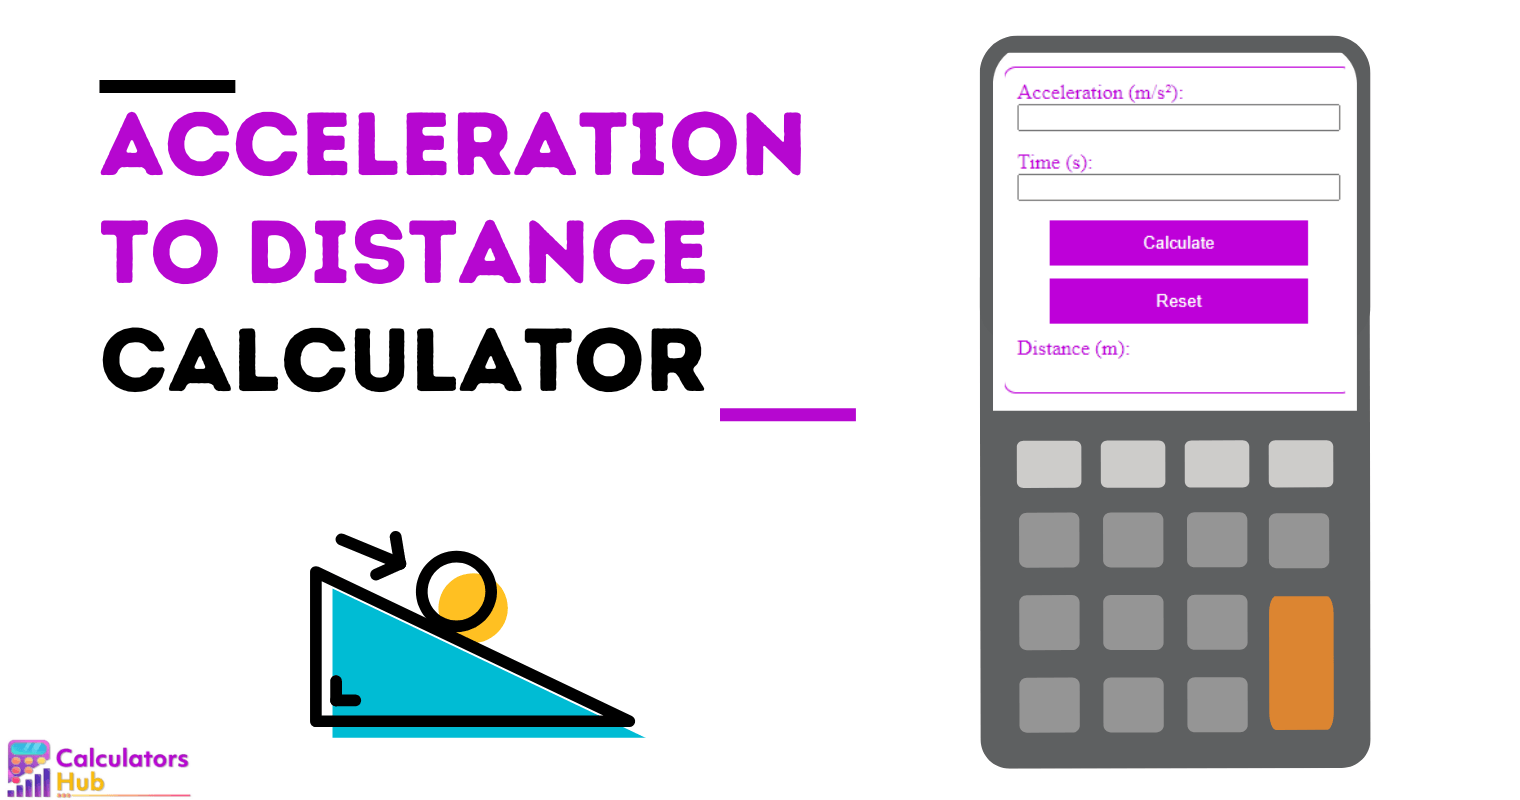 Acceleration to Distance Calculator